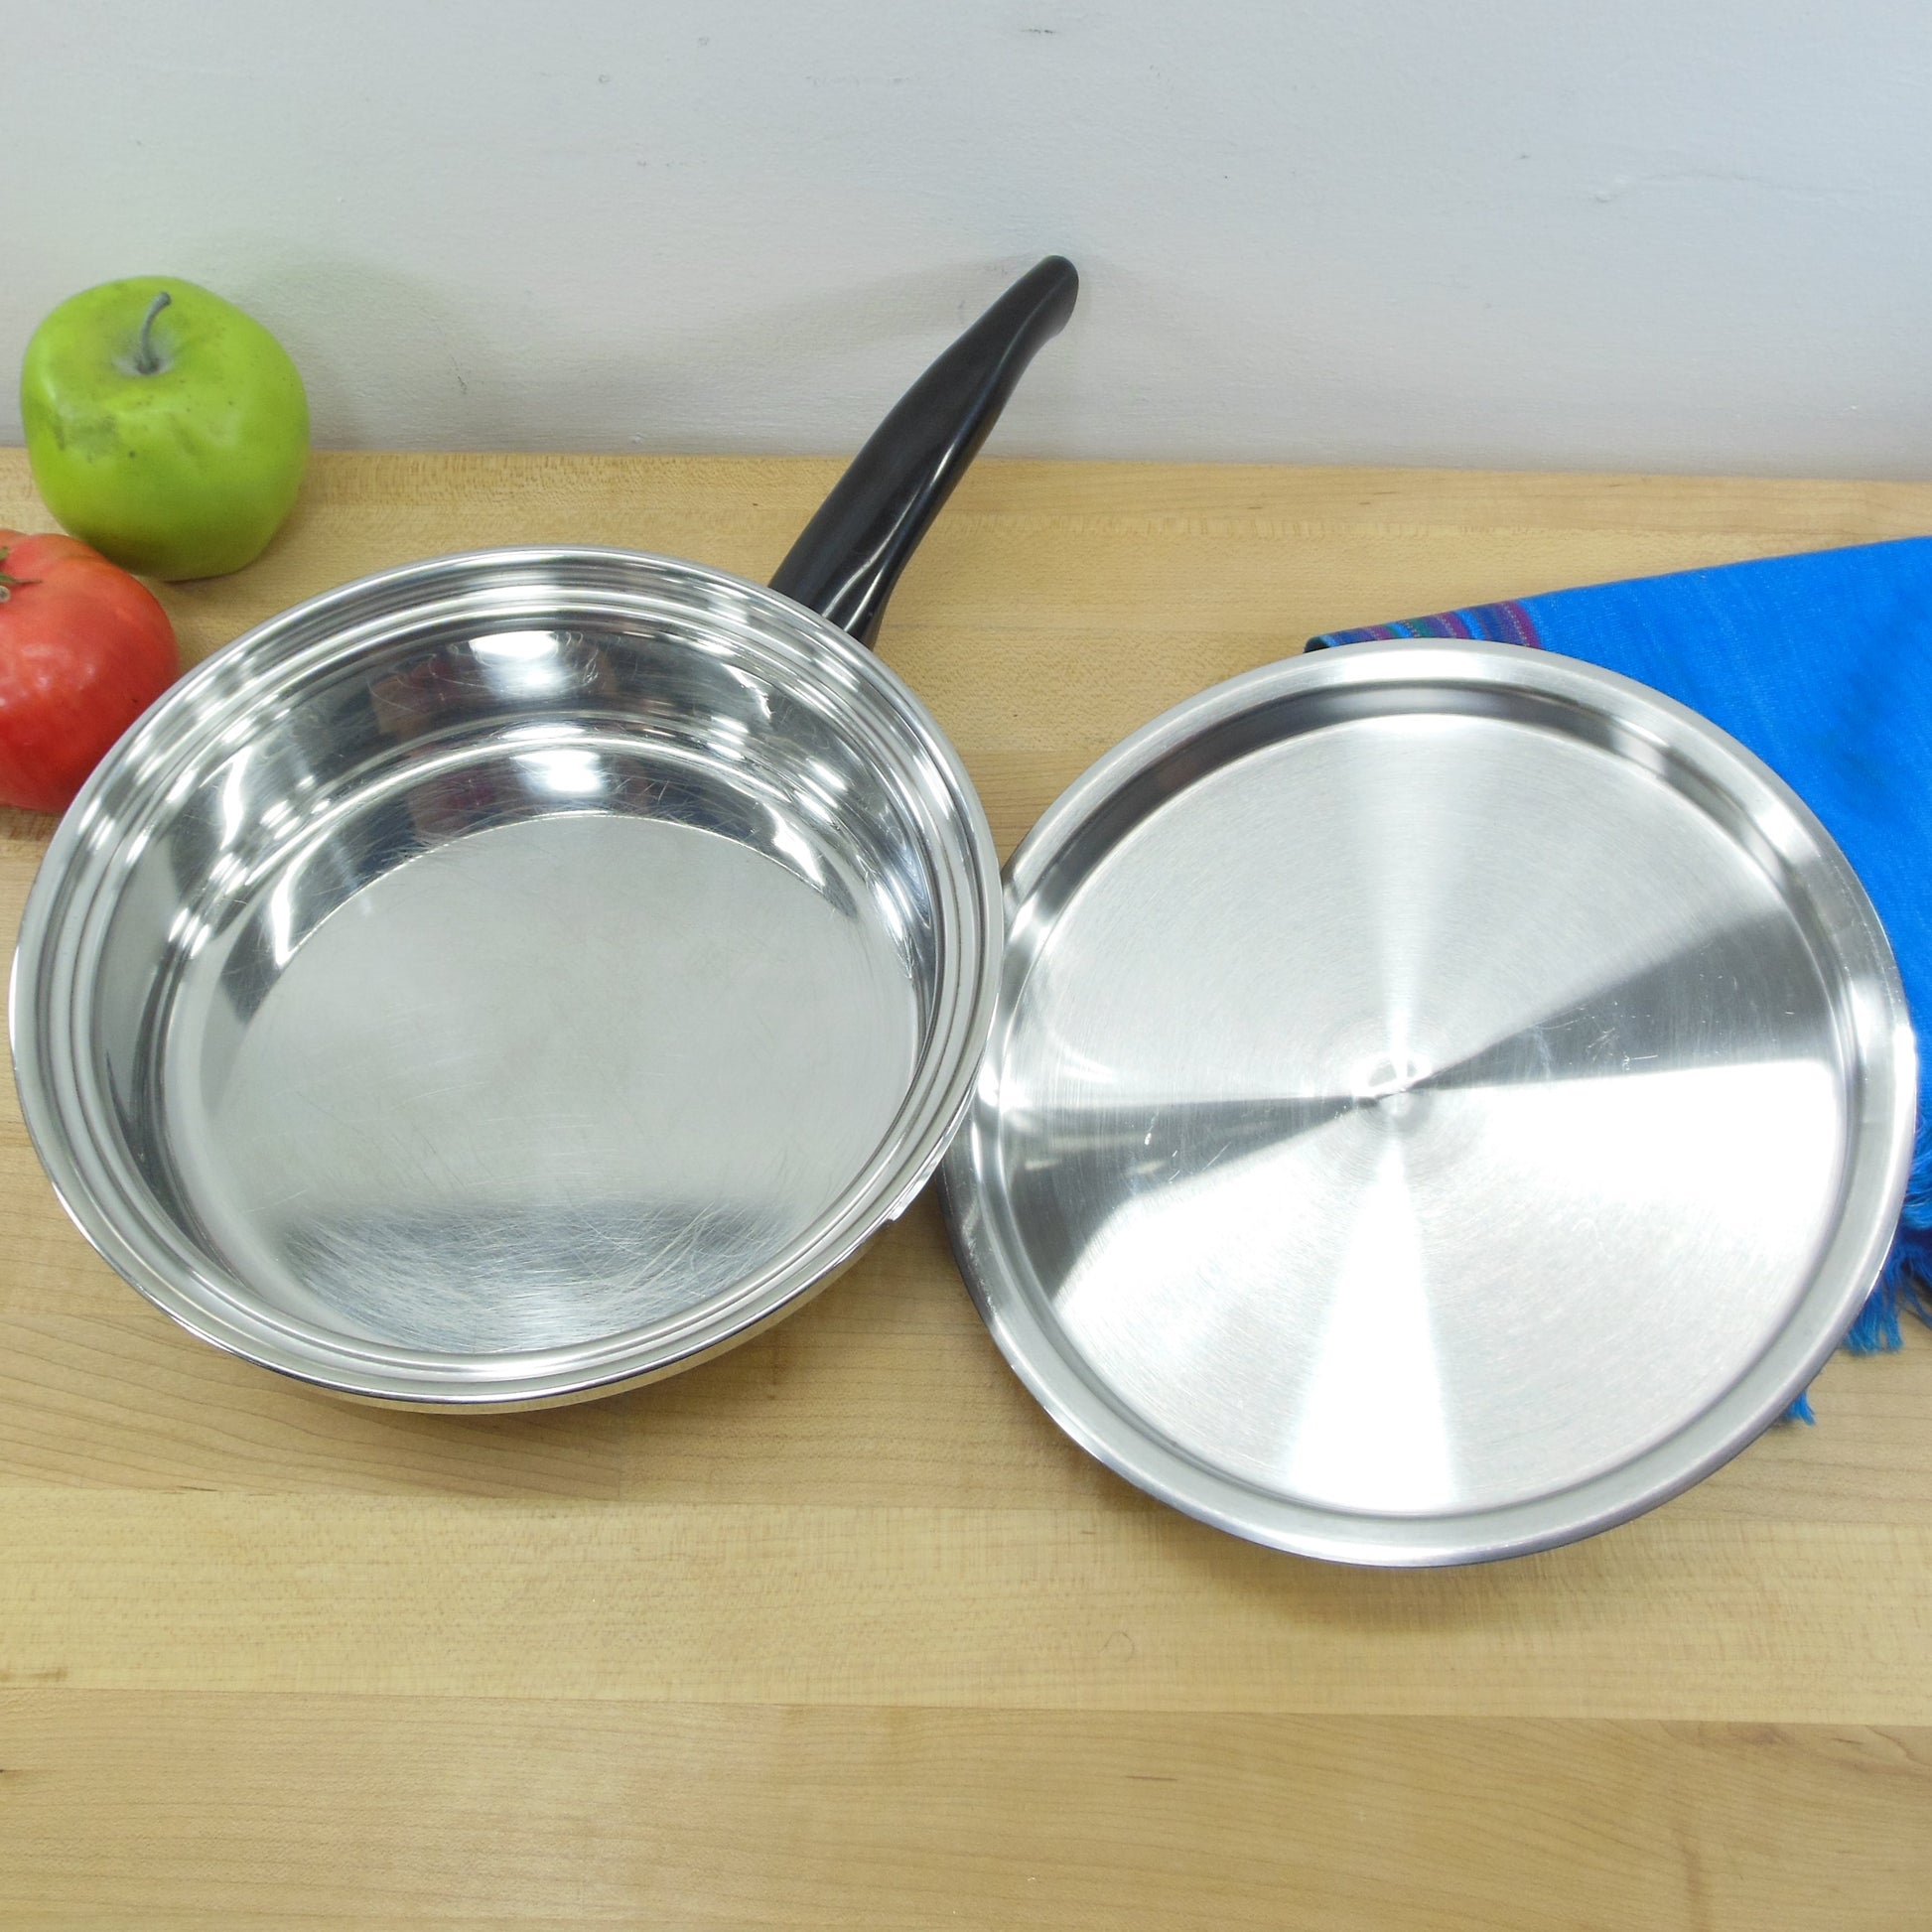 9-inch Fry Pan Induction Stainless Steel Made in the USA – Health Craft